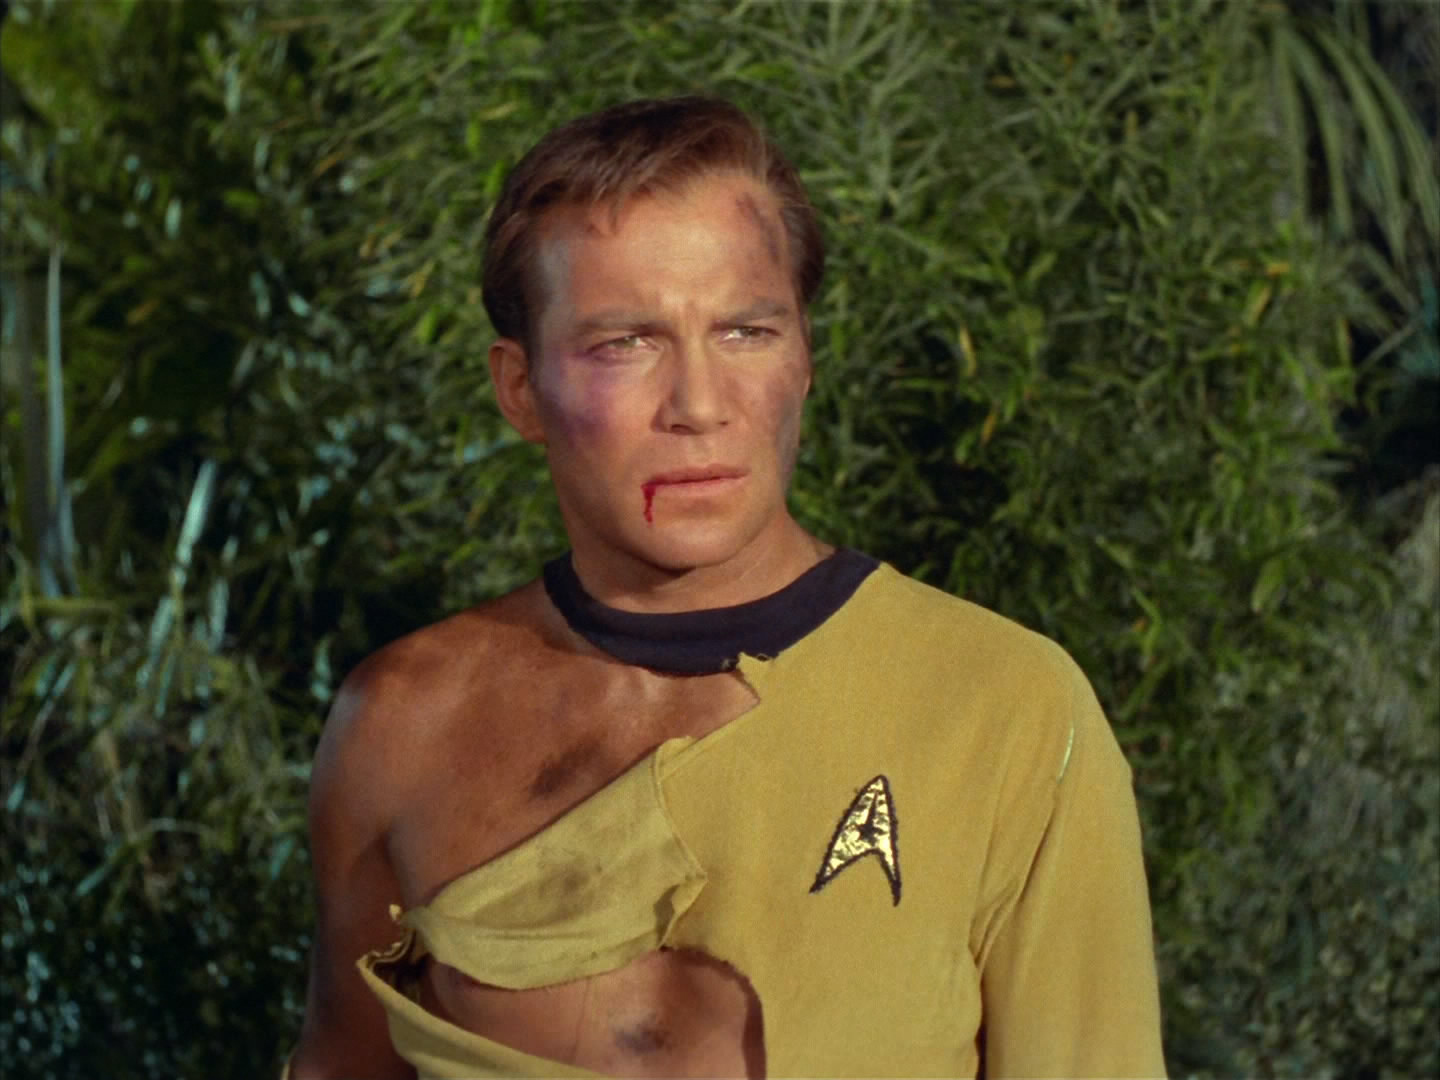 Here are two previous Shatner Kirk tunics at auction